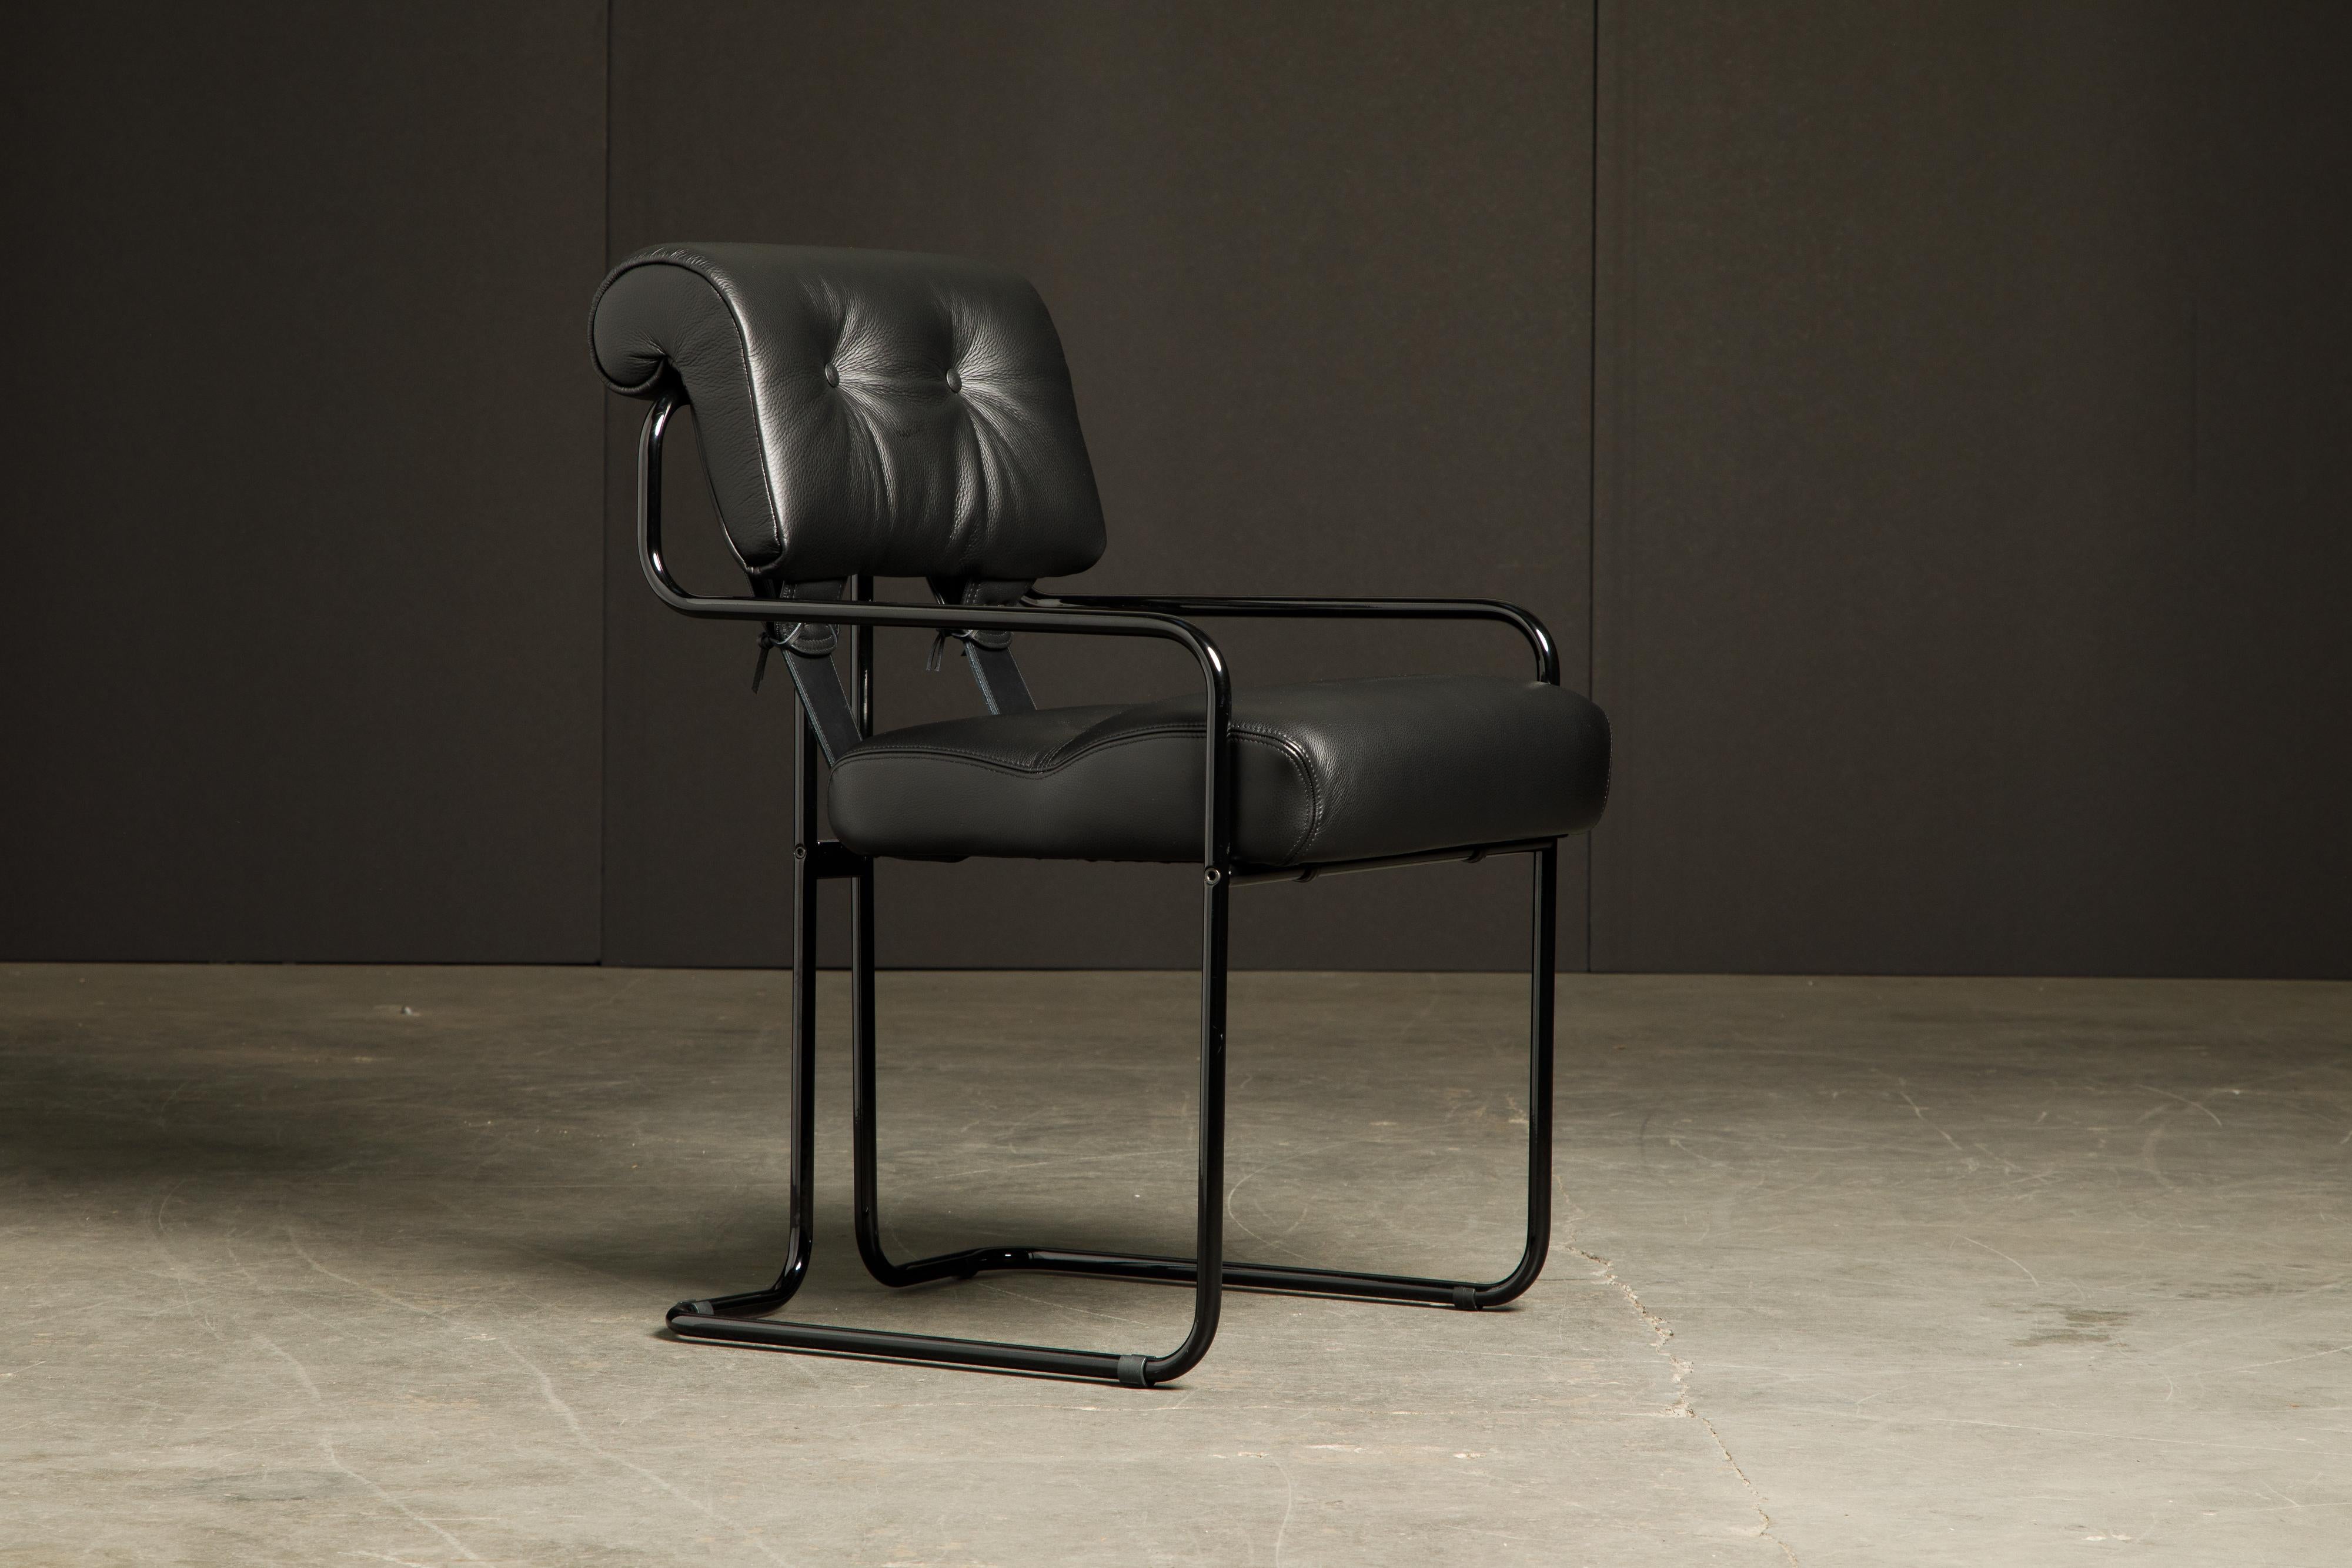 The most coveted dining chairs by interior designers are 'Tucroma' chairs by Guido Faleschini for i4 Mariani, and we have this incredible set of eight (8) Tucroma armchairs in beautiful black leather with lacquered black frames. The seats and backs